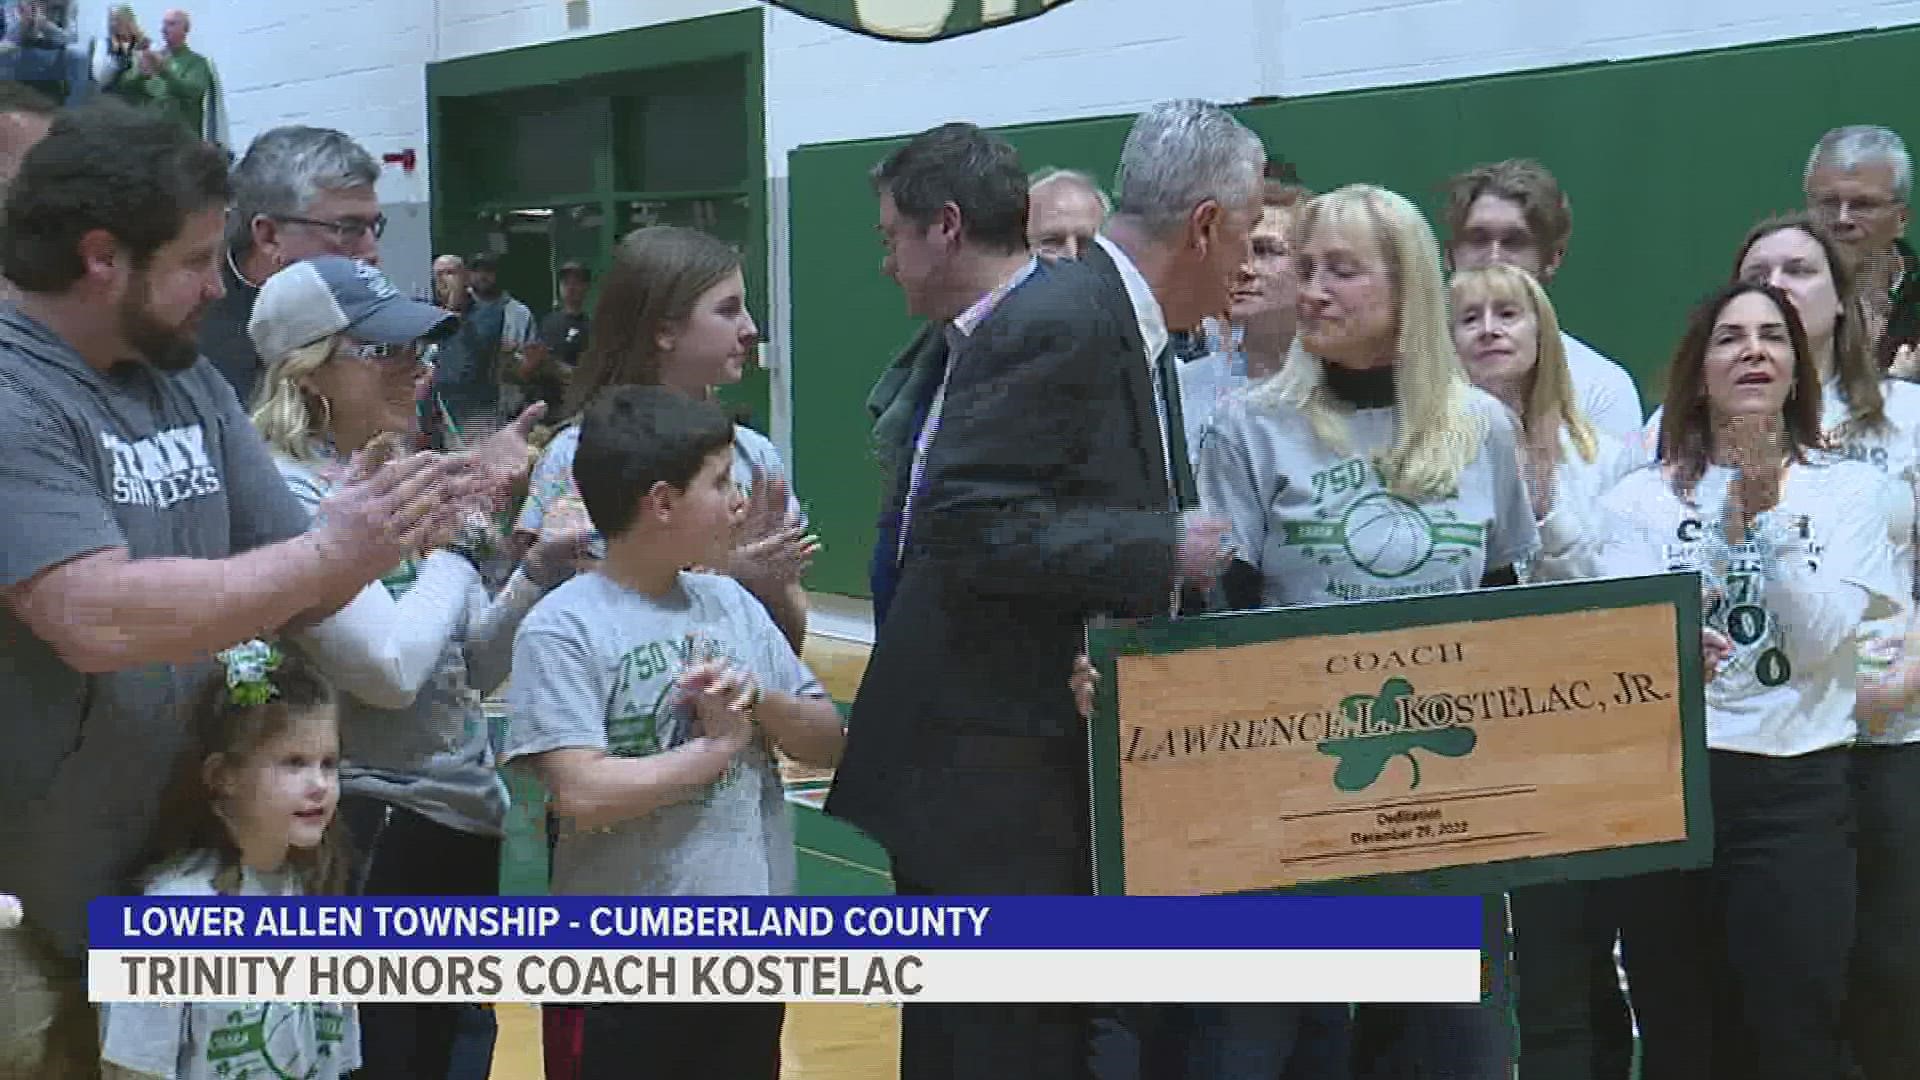 The Shamrocks coach has led the varsity program for over four decades and racked up over 700 wins all time